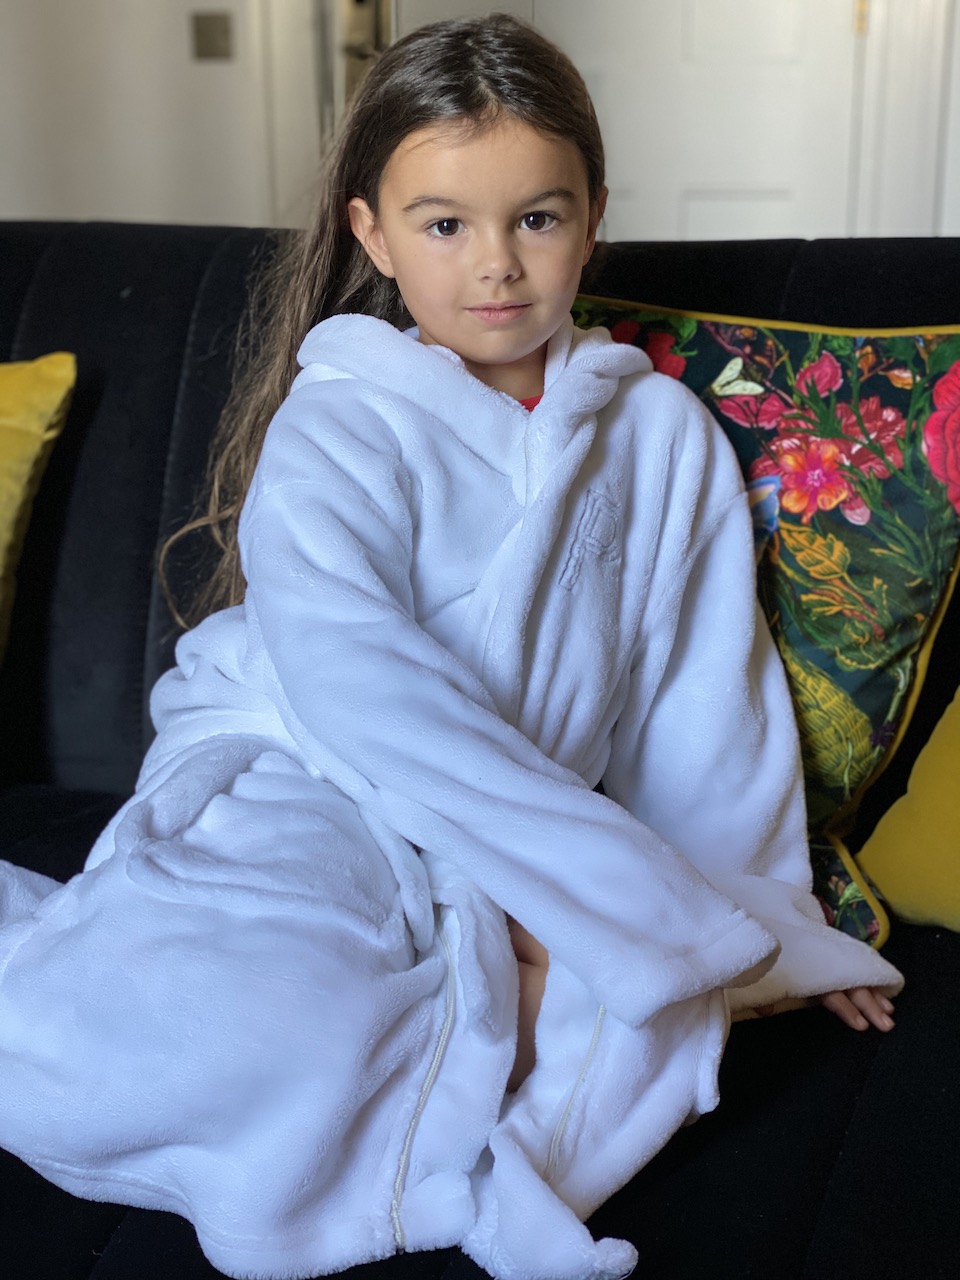 Lucy loved this robe